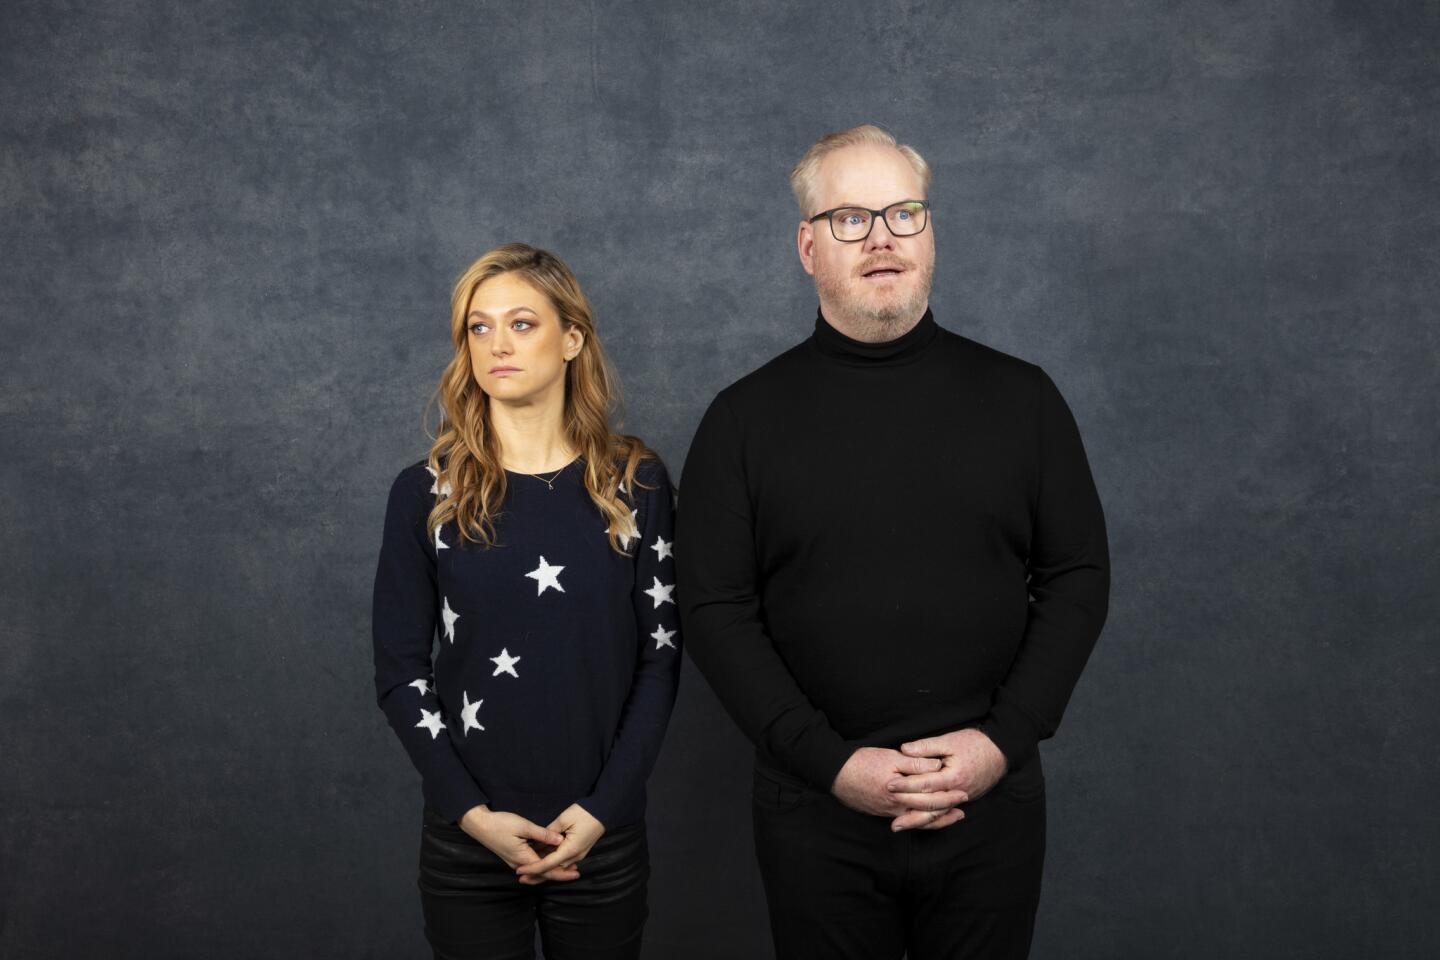 Actors Marin Ireland and Jim Gaffigan from the film "Light from Light."